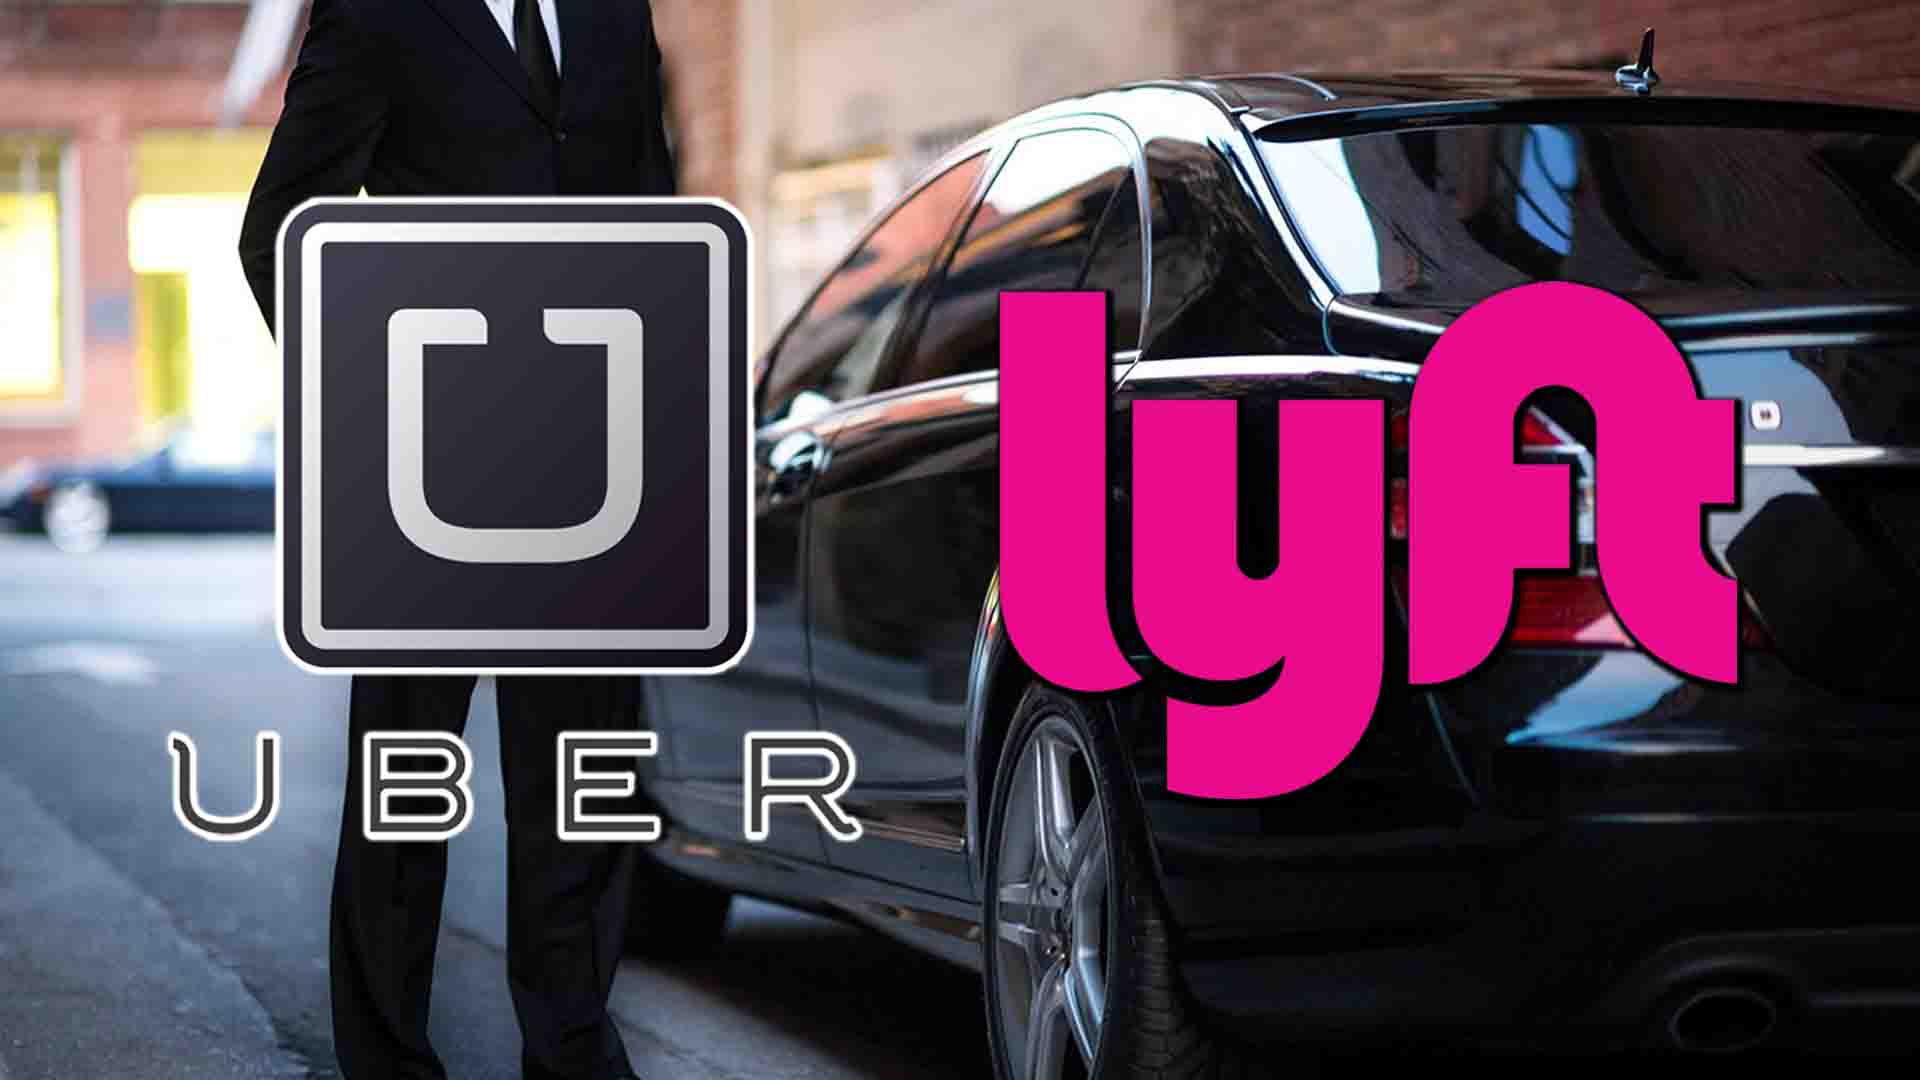 Lyft, Uber get 11th hour reprieve from California court order demanding they convert all drivers to employees